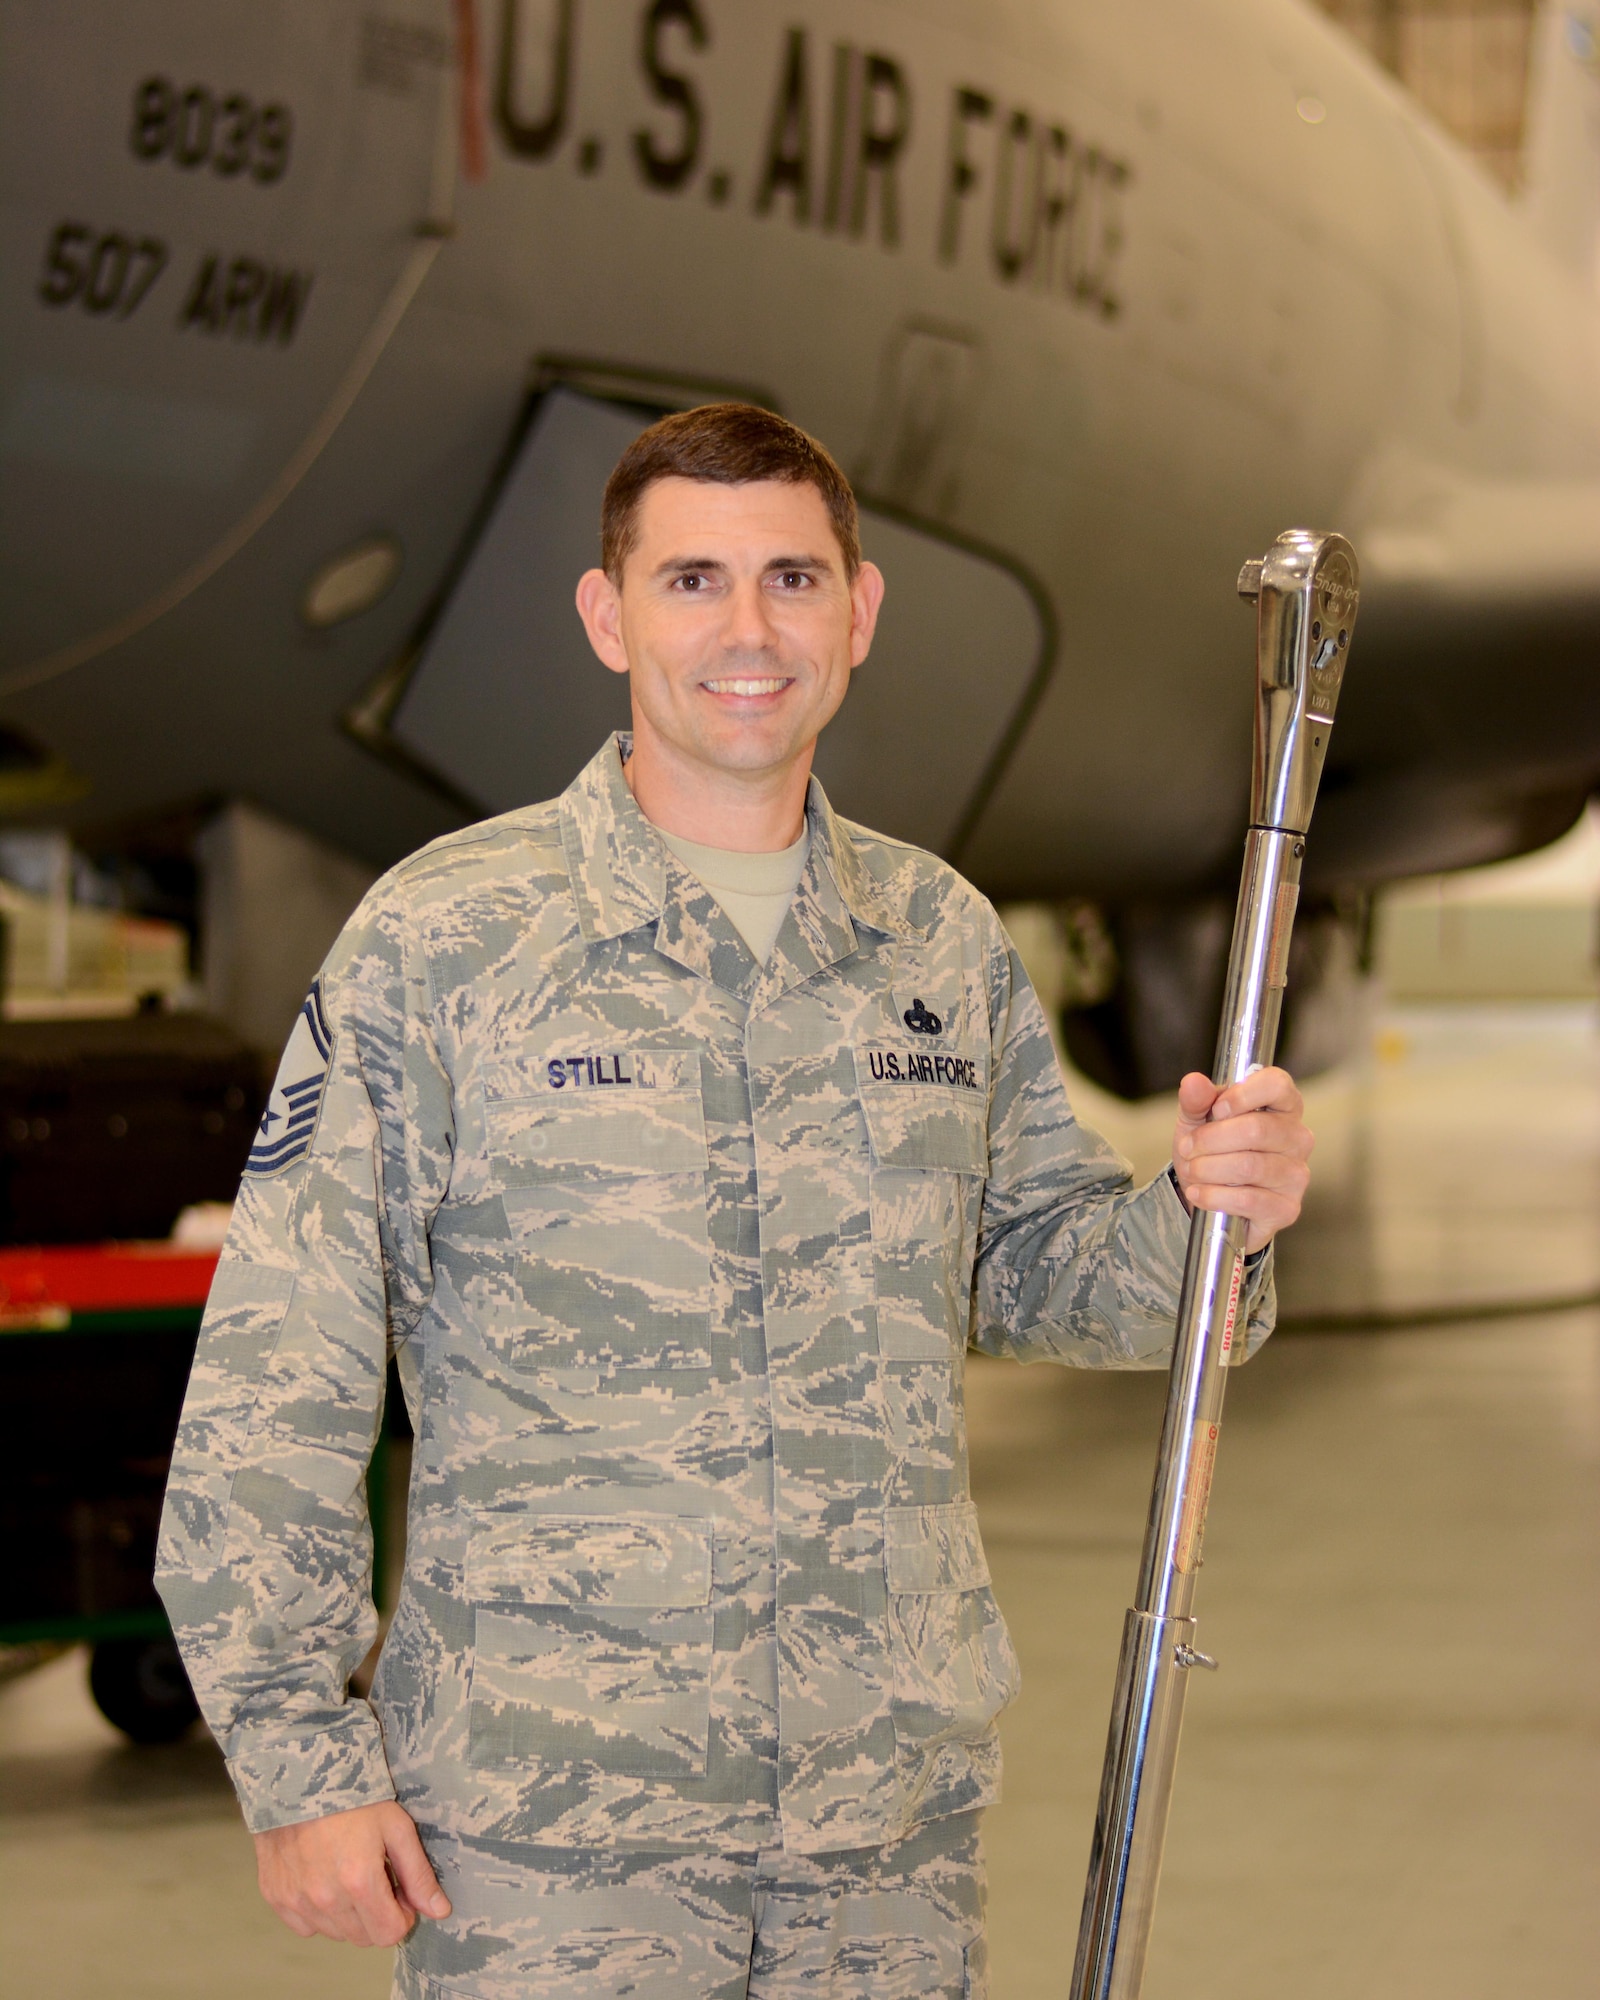 Senior Master Sgt. Corey Still, 507th Aircraft Maintenance Squadron aircraft maintenance unit superintendent, wields a torque wrench while posing for a photo Dec. 20, 2017, at Tinker Air Force Base, Okla. Still provided lifesaving assistance to a motorcyclist following a vehicle accident in November 2017. (U.S. Air Force photo/Tech. Sgt. Lauren Gleason)